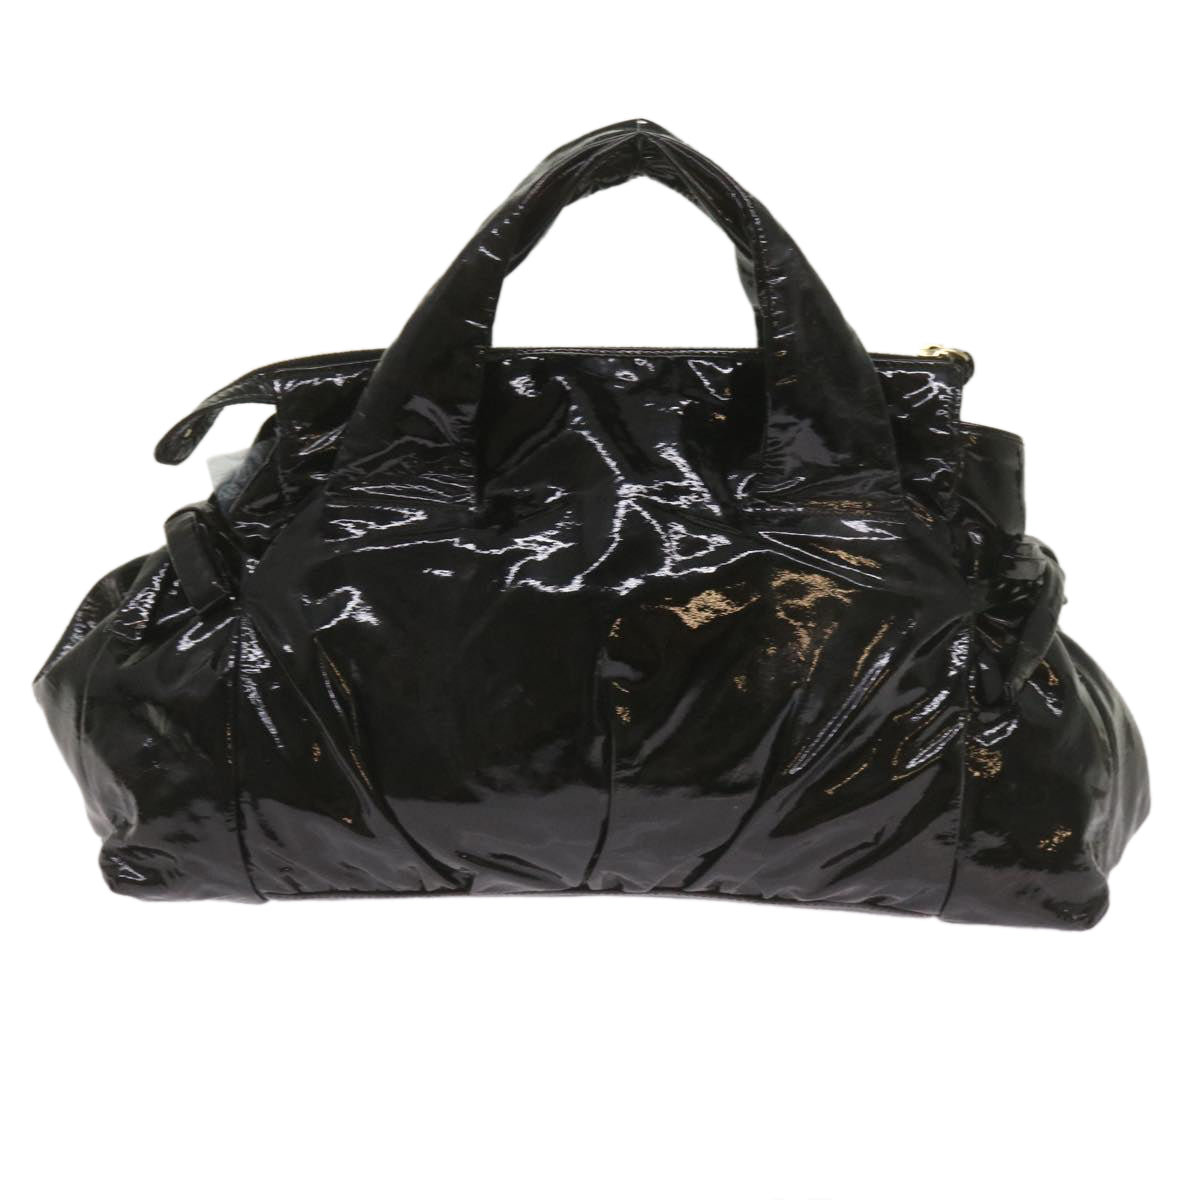 GUCCI Hand Bag Patent leather Black 197020 Auth bs12891 - 0